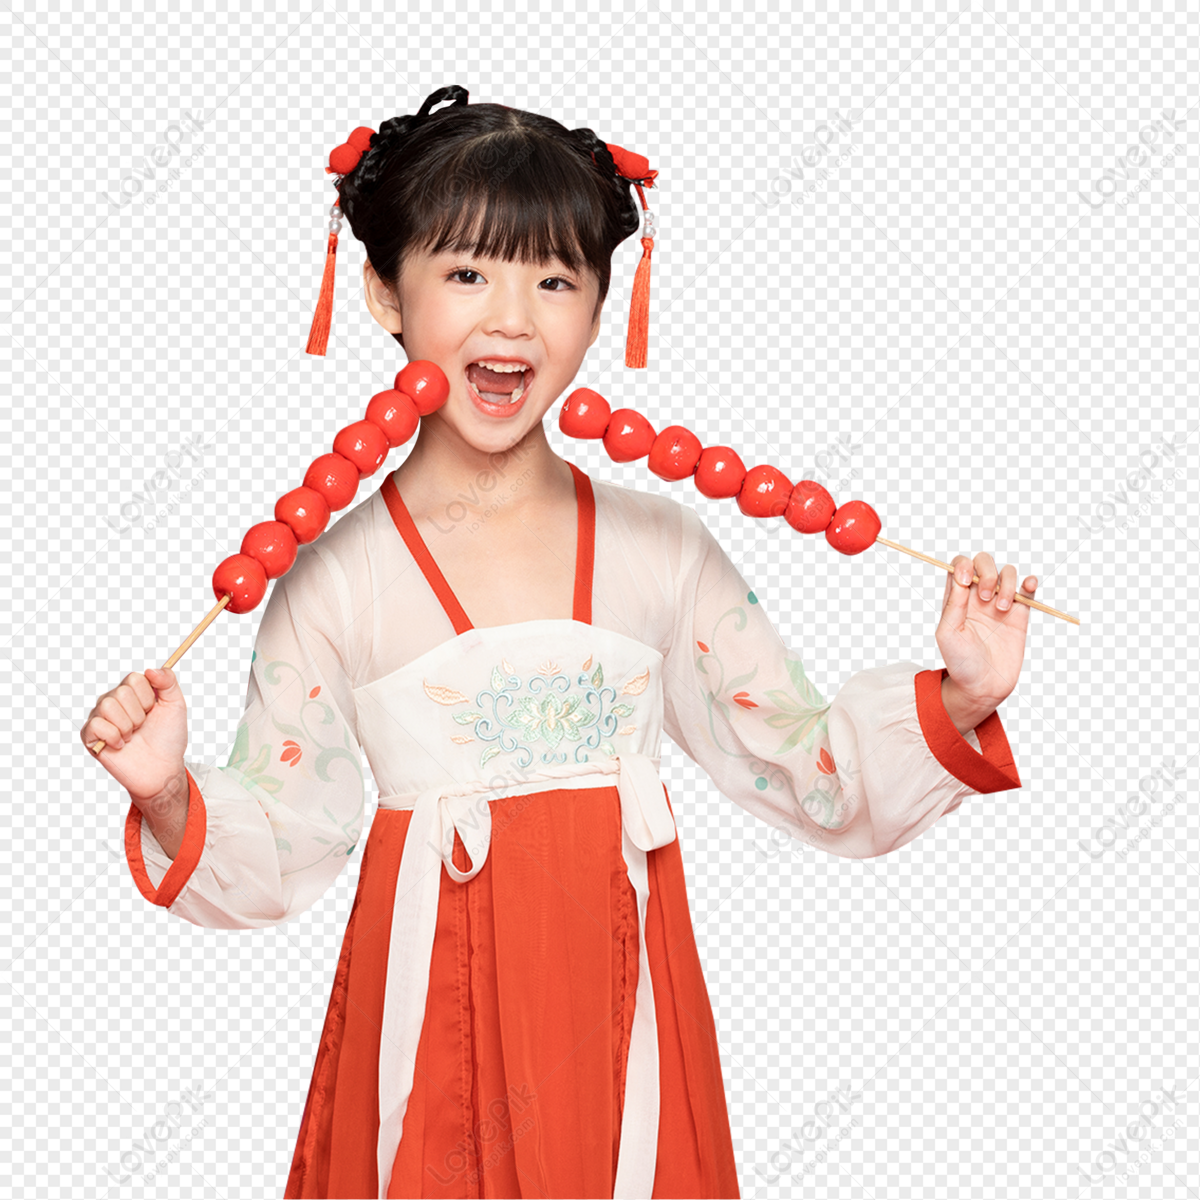 Chinese Style Little Girl Eating Candied Haws PNG Transparent ...